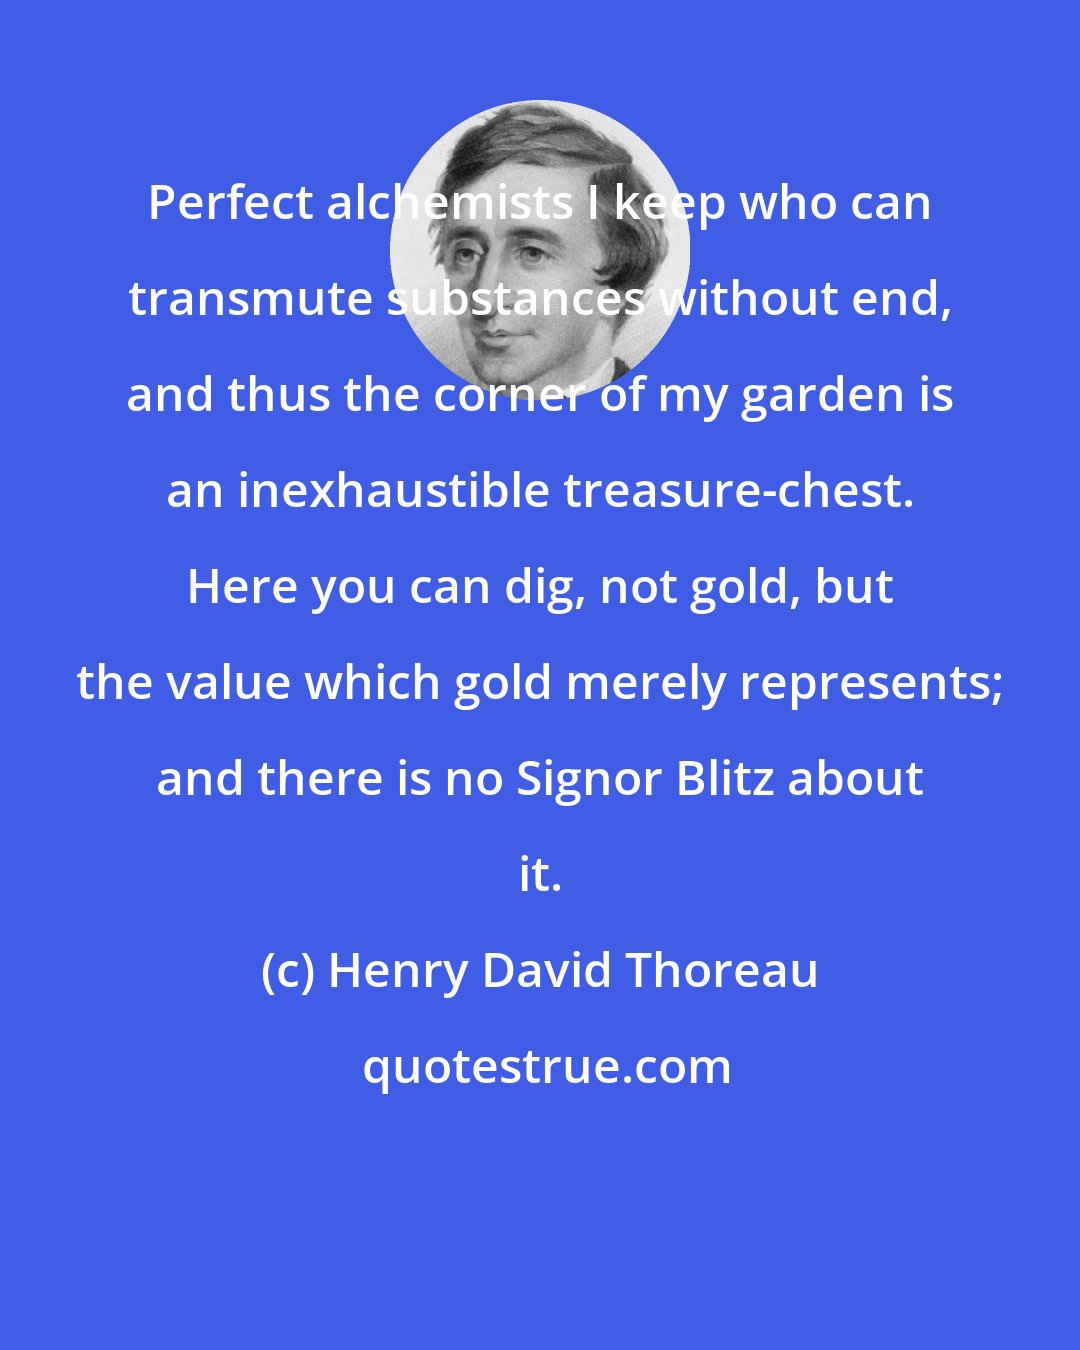 Henry David Thoreau: Perfect alchemists I keep who can transmute substances without end, and thus the corner of my garden is an inexhaustible treasure-chest. Here you can dig, not gold, but the value which gold merely represents; and there is no Signor Blitz about it.